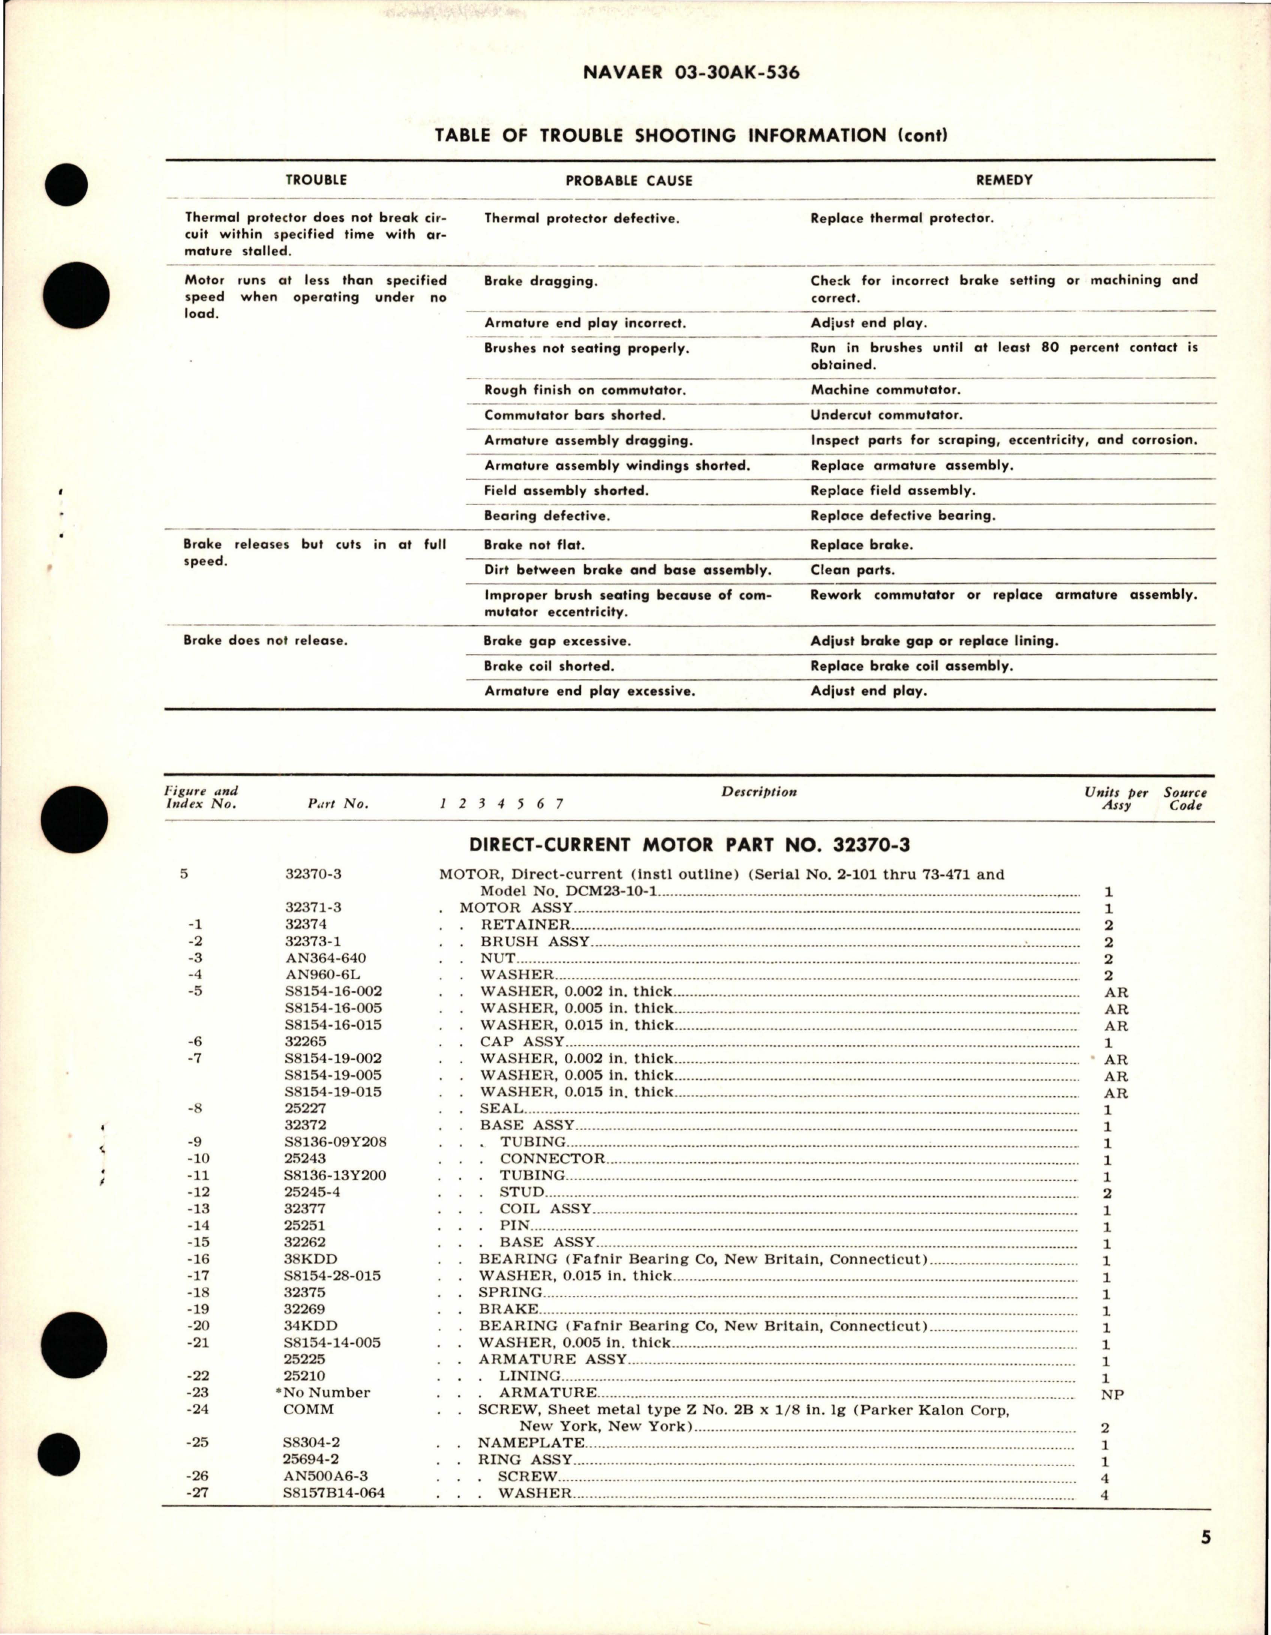 Sample page 5 from AirCorps Library document: Overhaul Instructions with Parts Breakdown for Direct-Current Motor - Part 32370-3 - Model DCM23-10